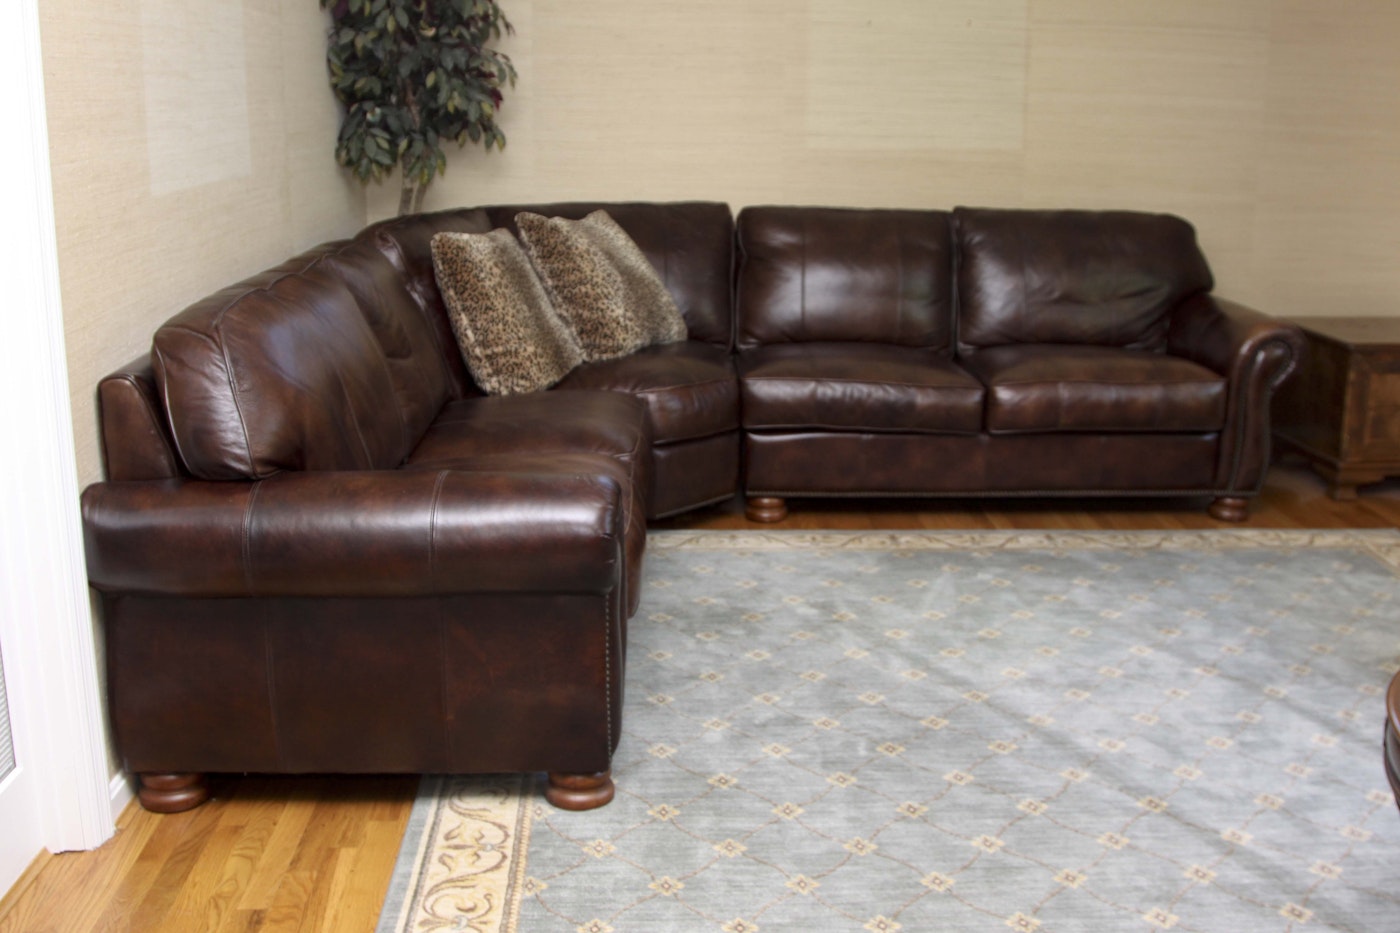 thomasville ashby leather sofa price